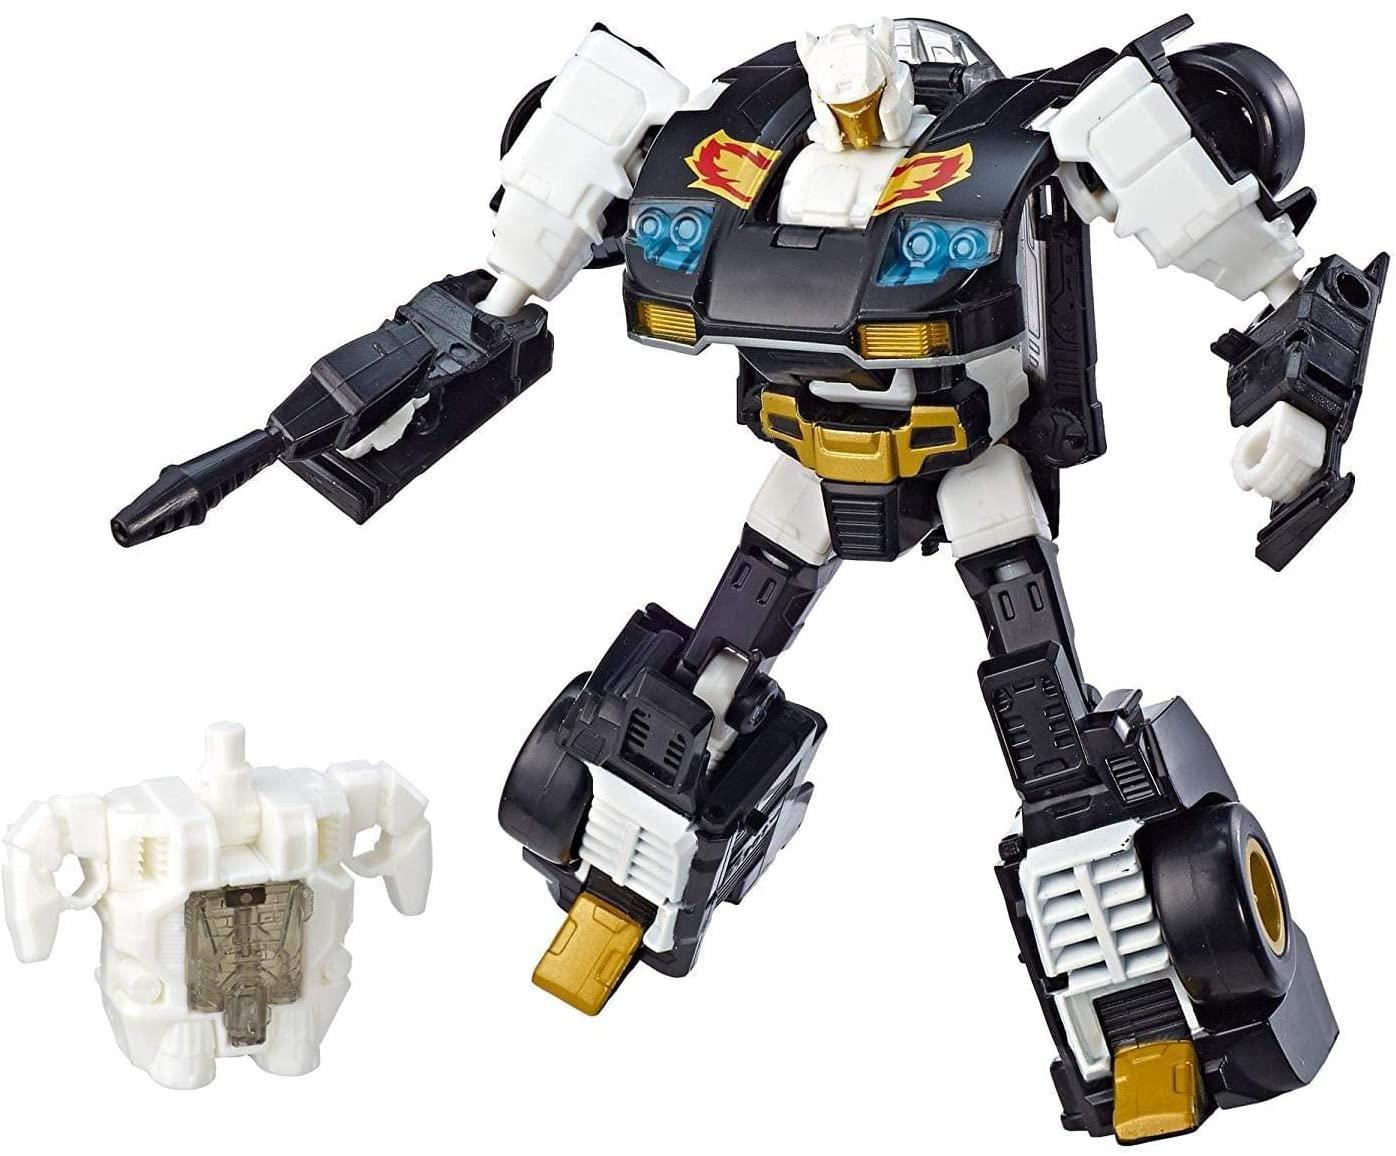 Hasbro Transformers Generation Selects: Ricochet Deluxe Action Figure